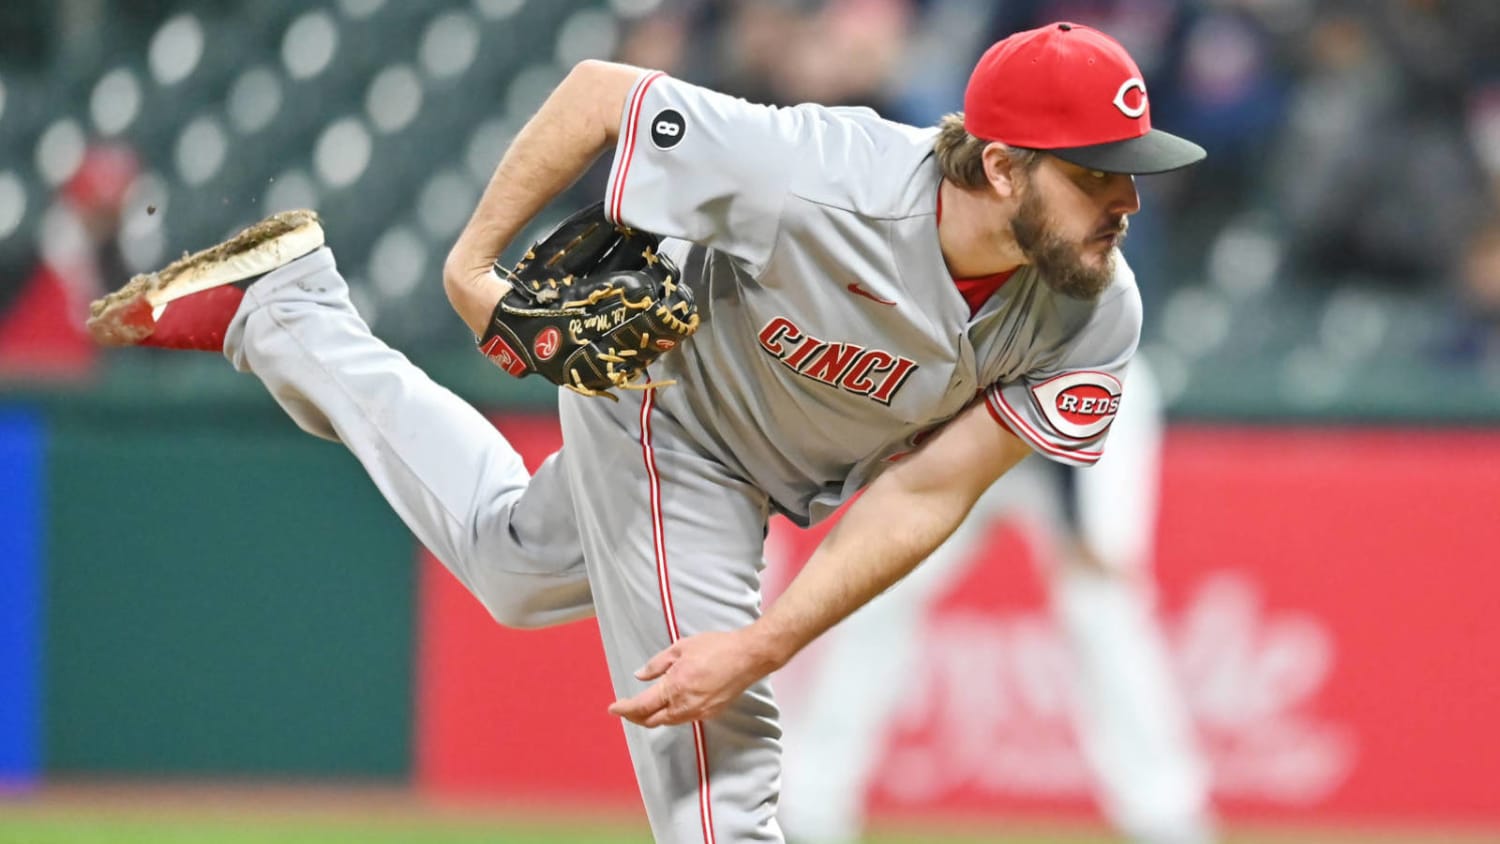 Reds' Wade Miley tosses MLB's fourth no-hitter of season: 'It feels surreal'